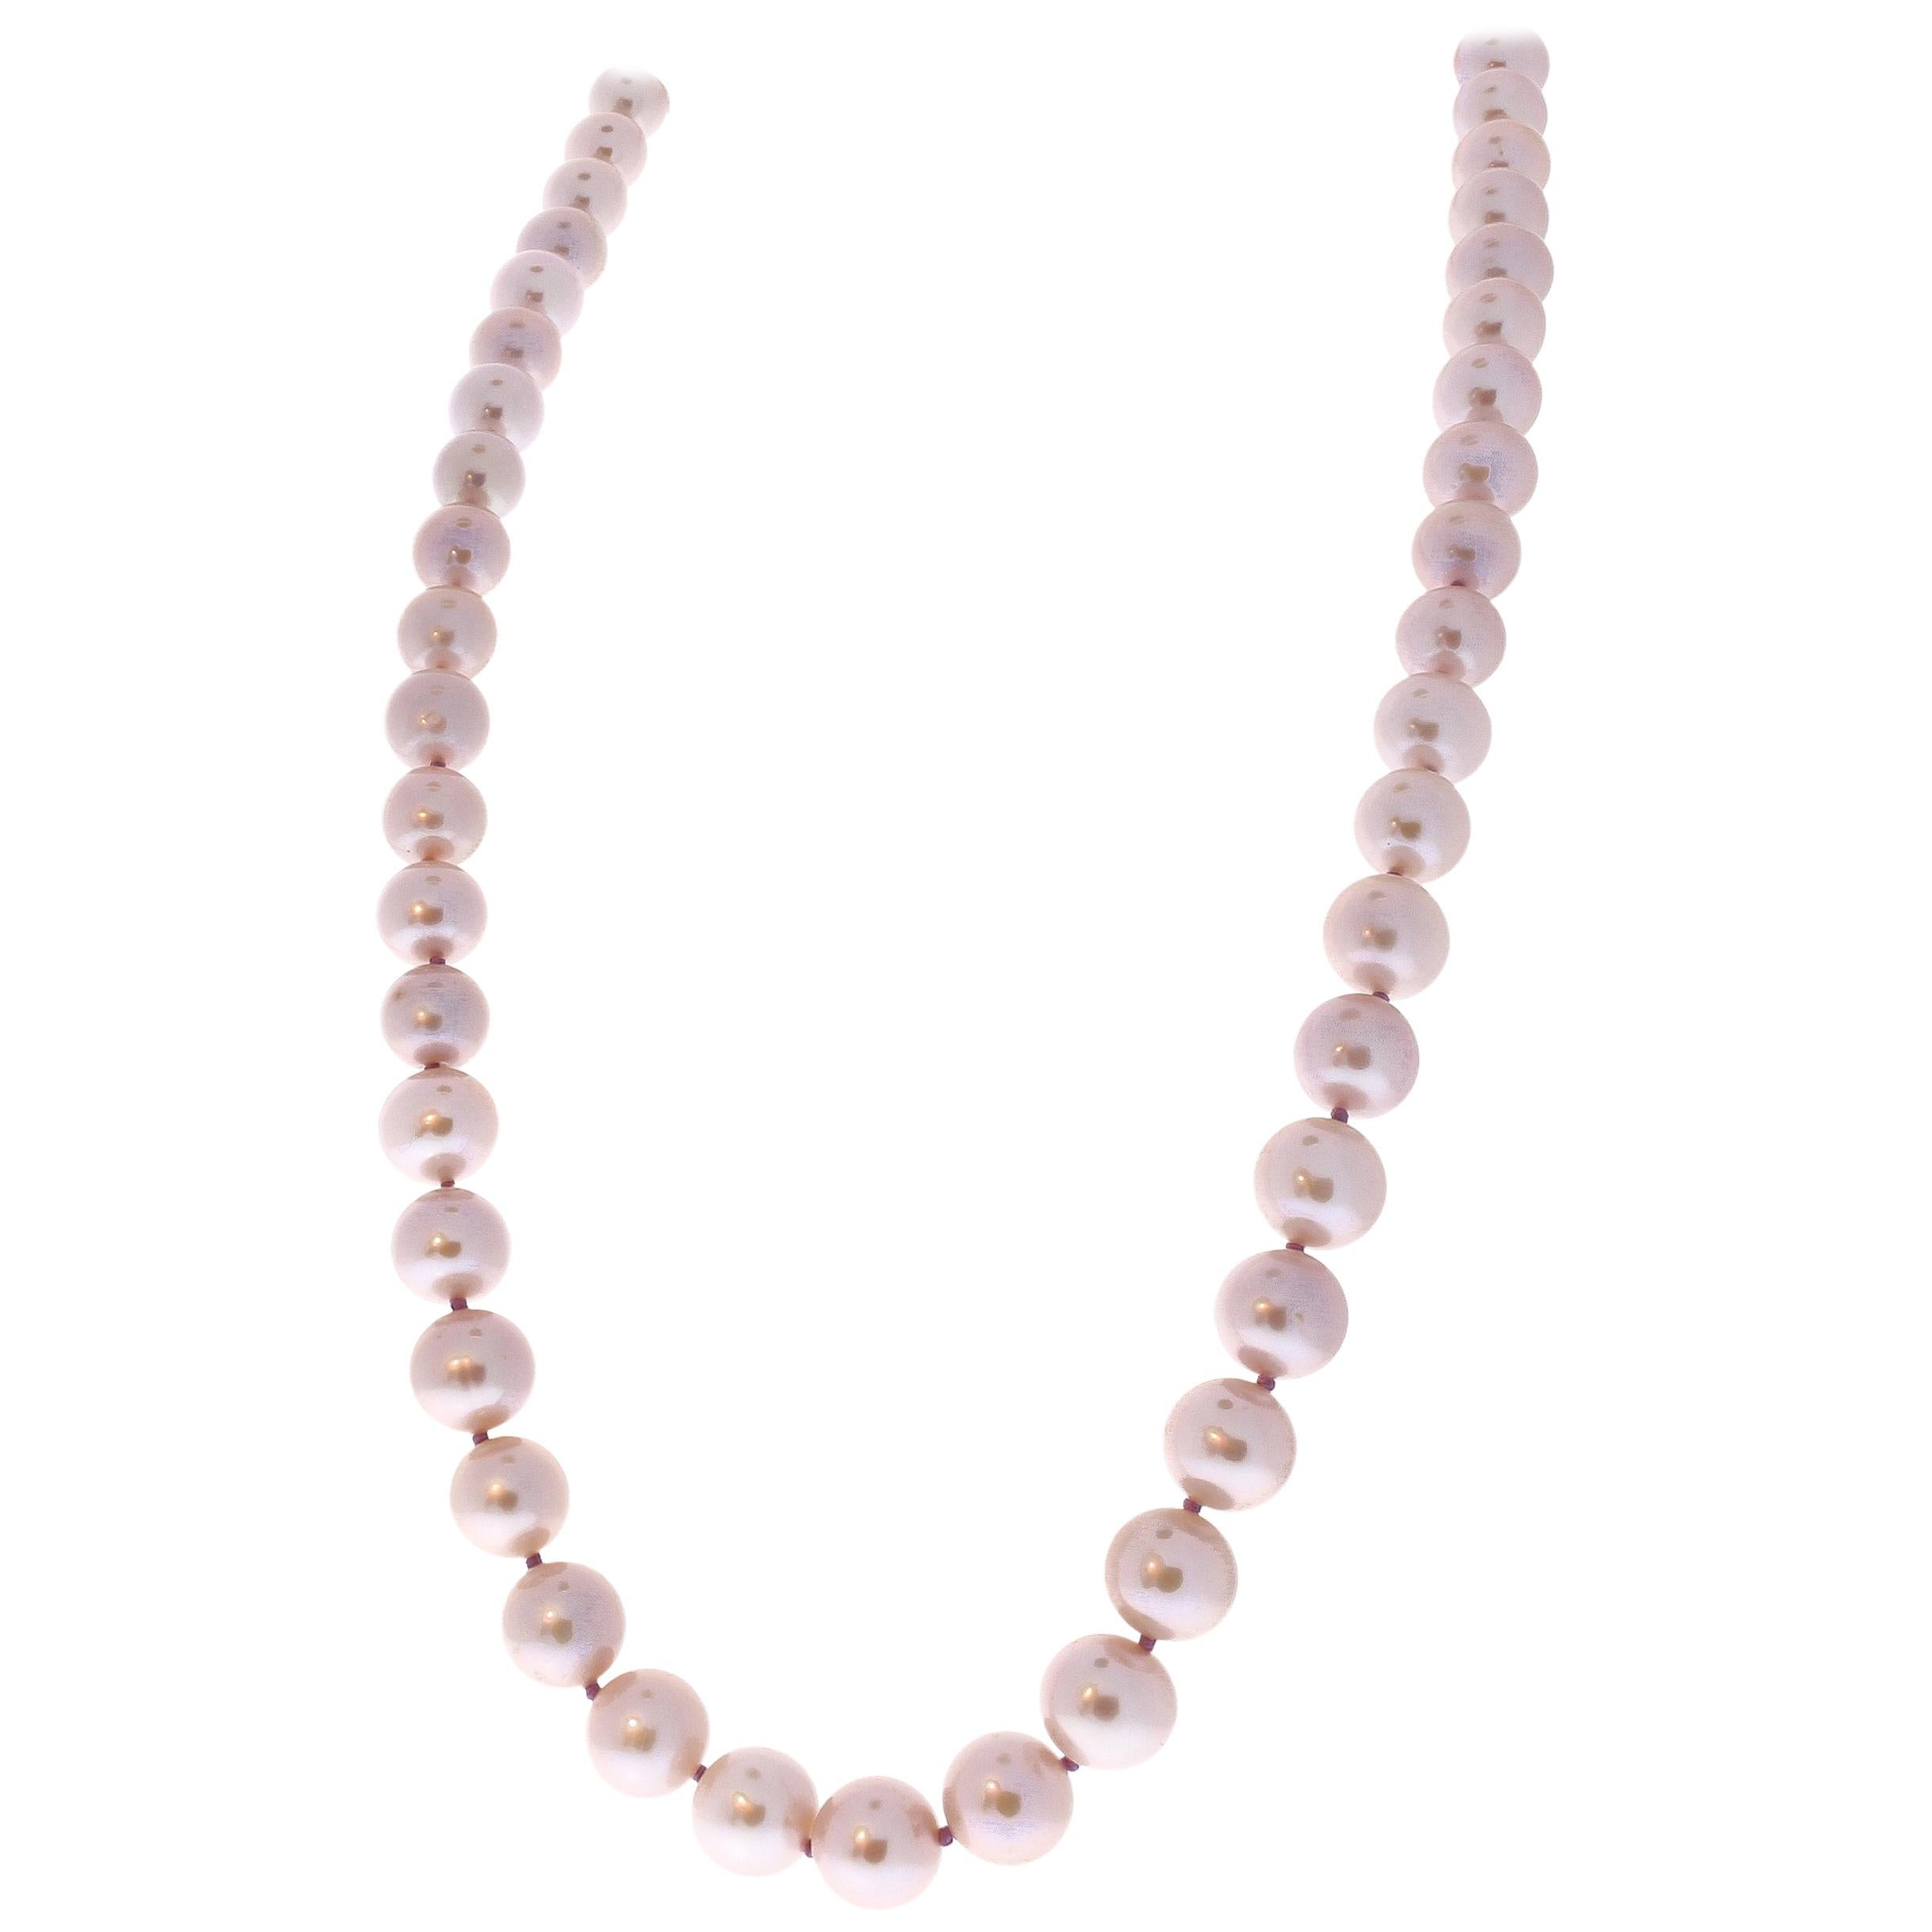 Lavender Cultured Pearls and Diamond 14 Karat White Gold Necklace